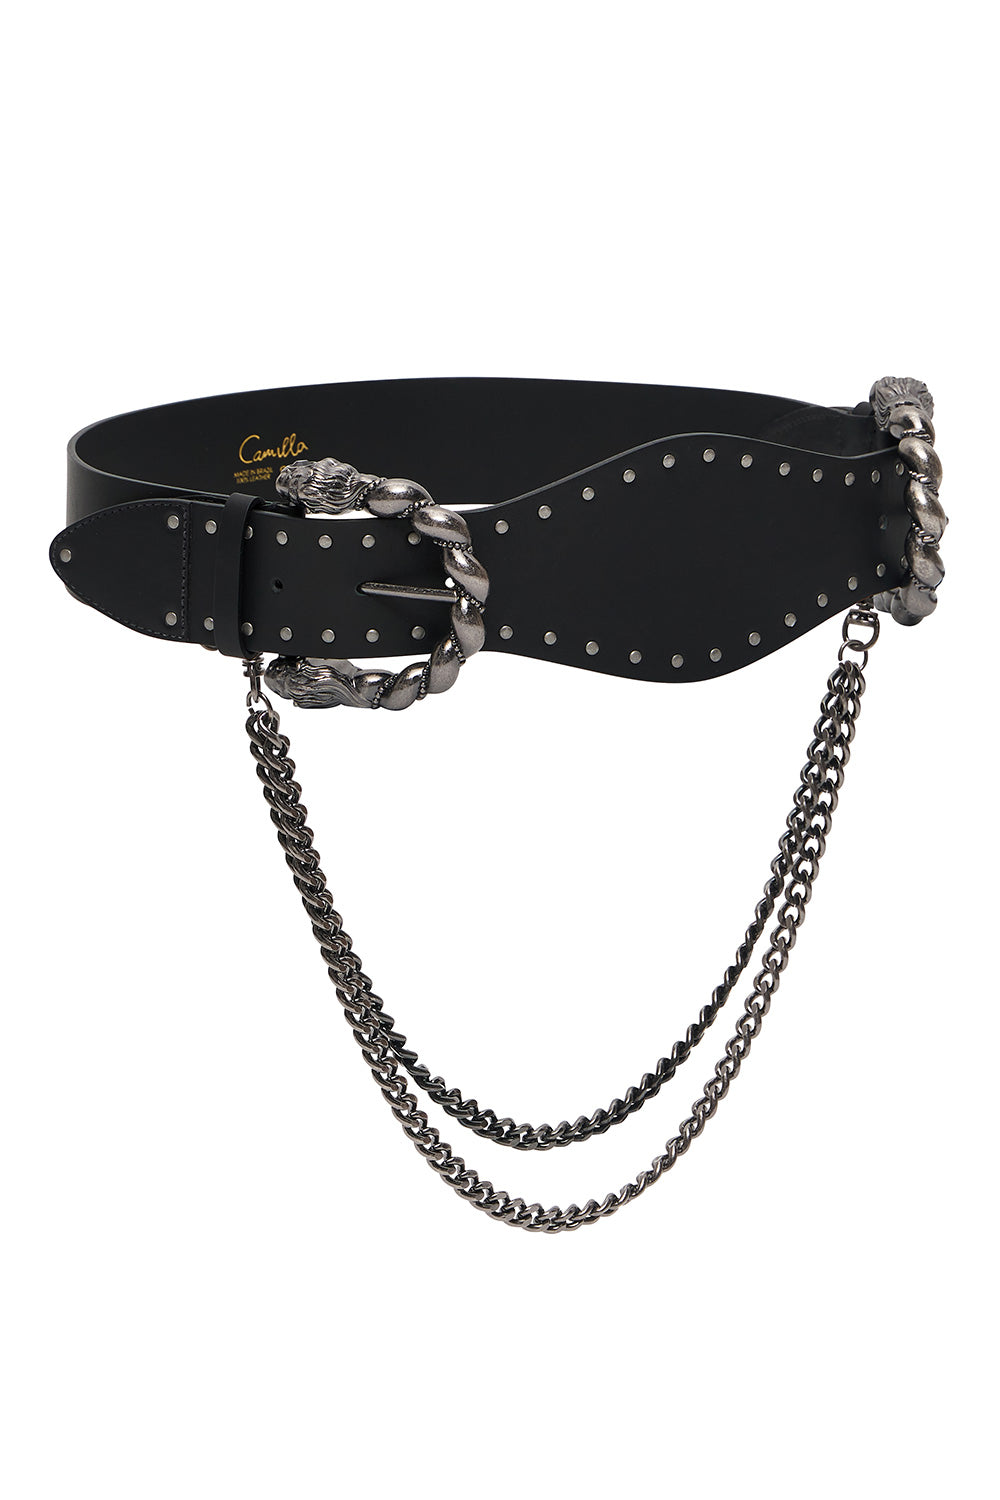 DOUBLE LION BUCKLE BELT WITH CHAIN SOLID BLACK